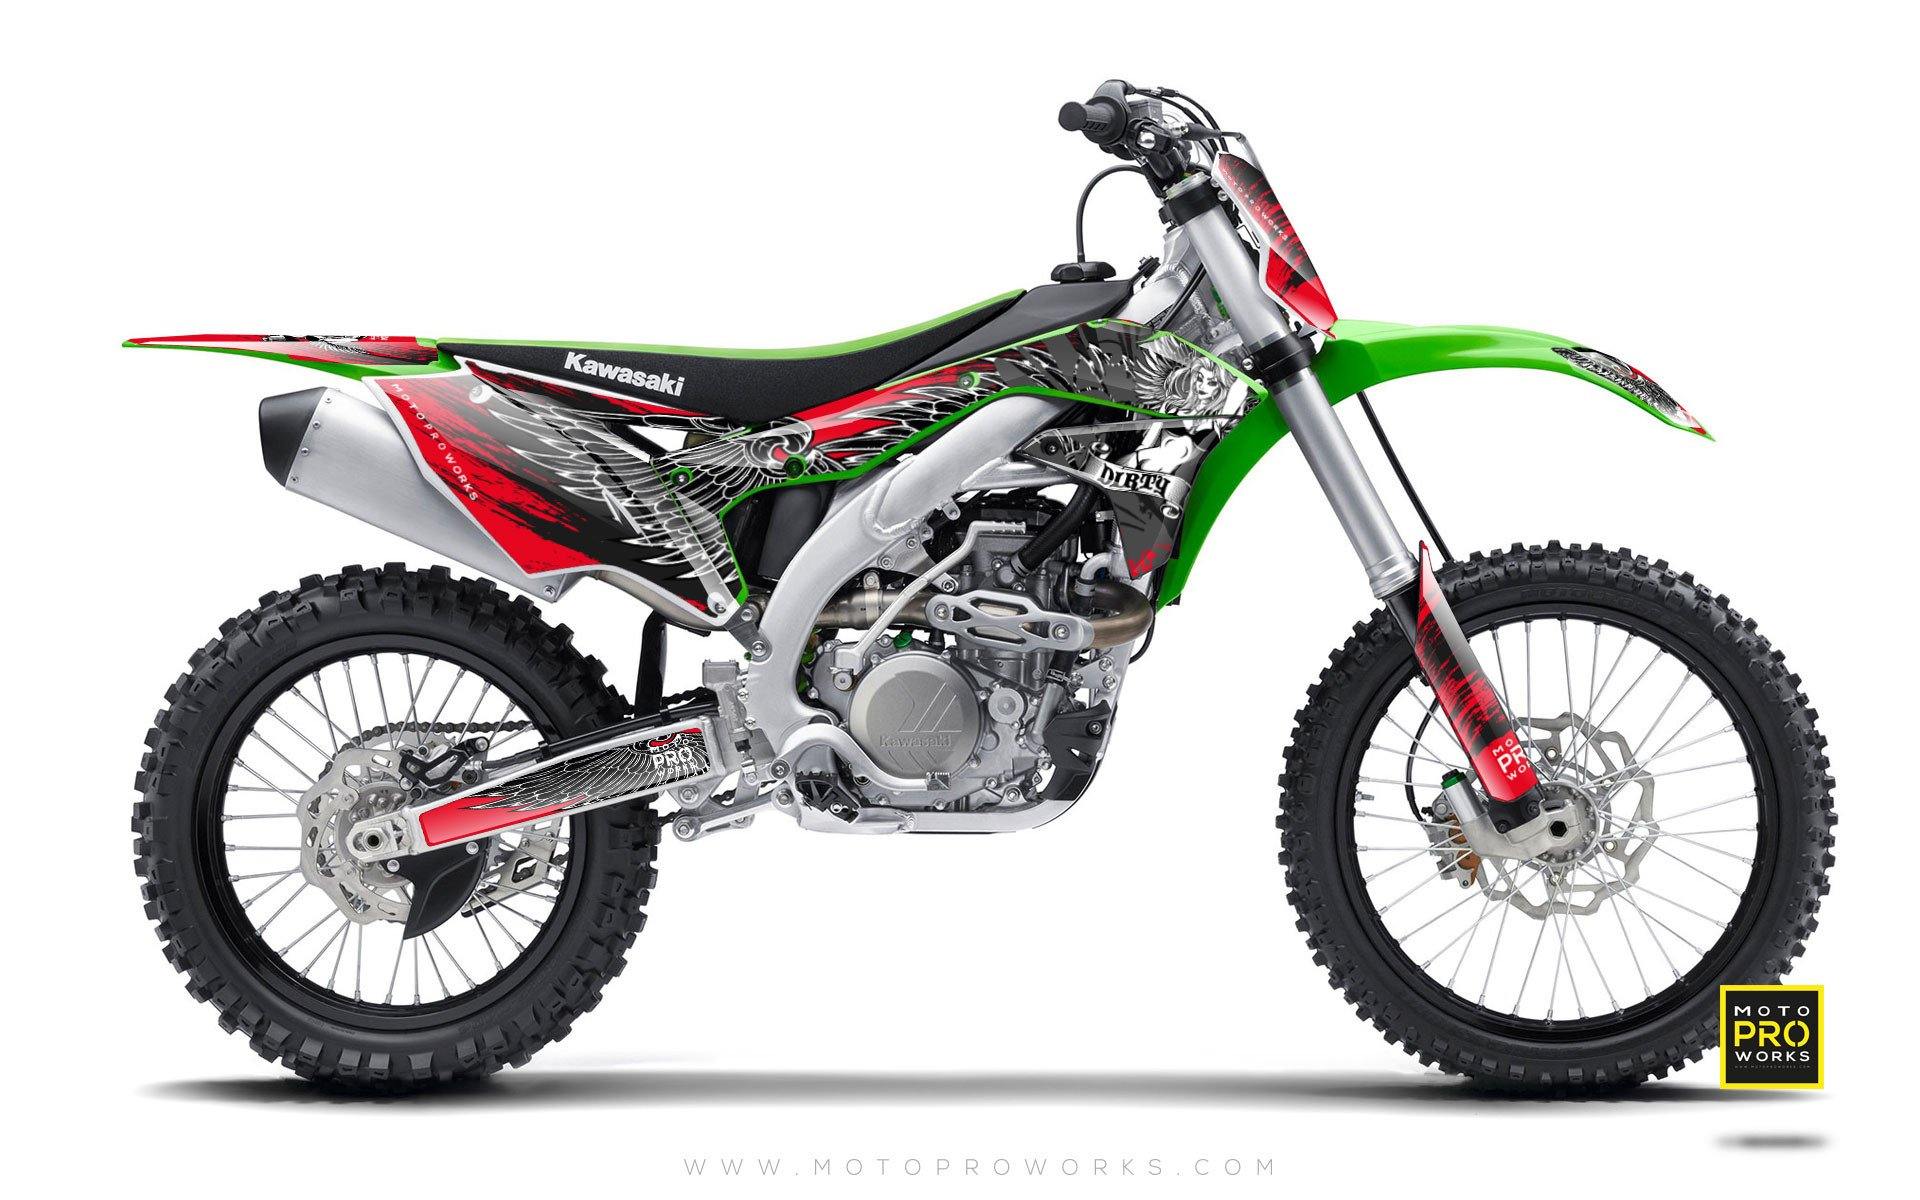 Kawasaki GRAPHIC KIT - "Dirty Angel" (red) - MotoProWorks | Decals and Bike Graphic kit